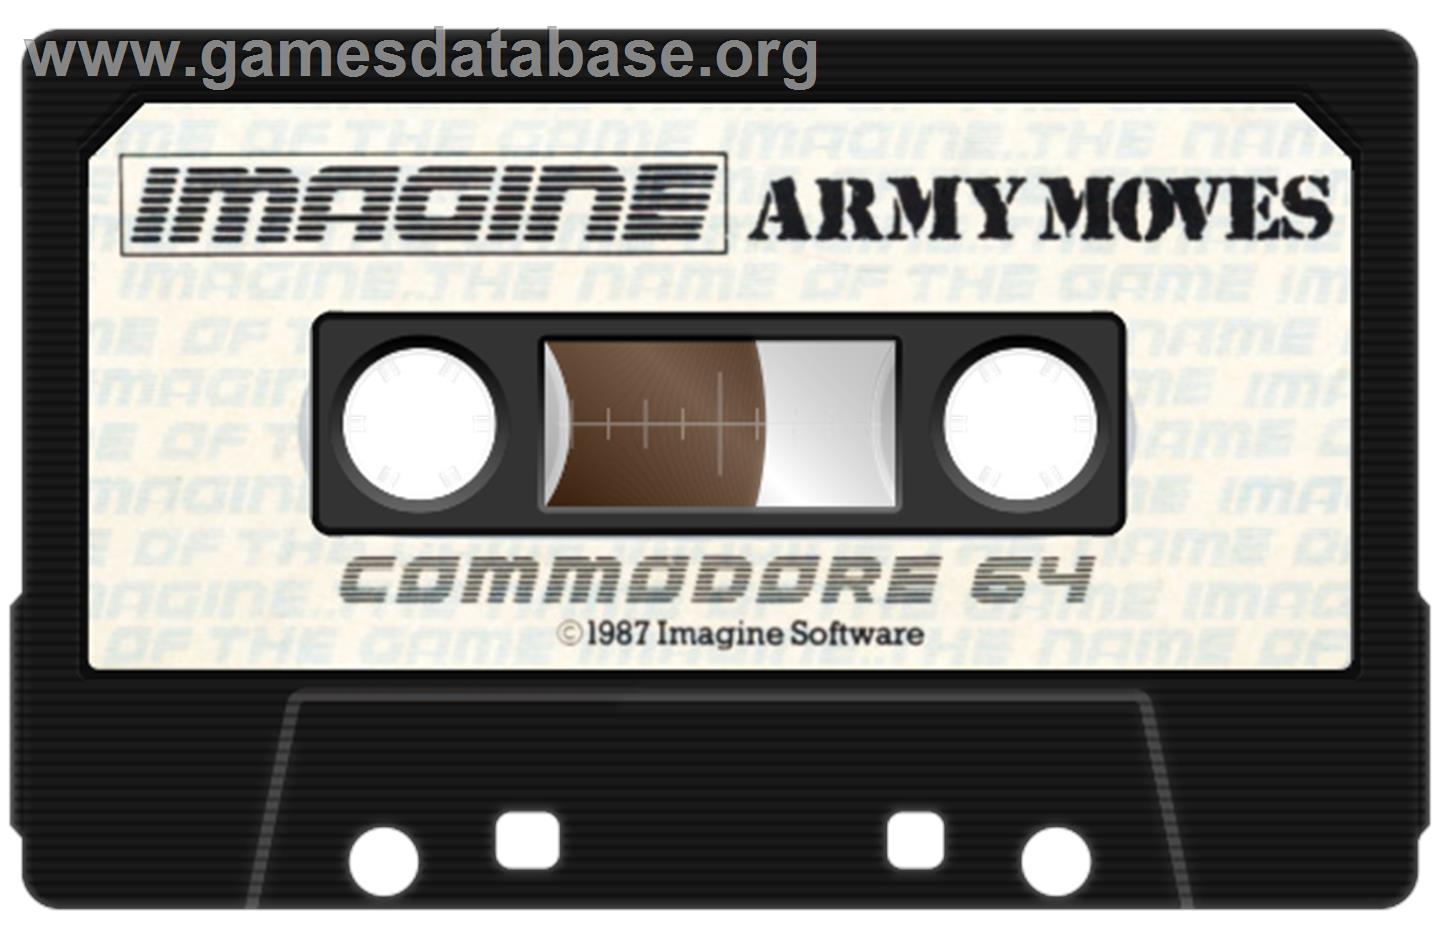 Army Moves - Commodore 64 - Artwork - Cartridge